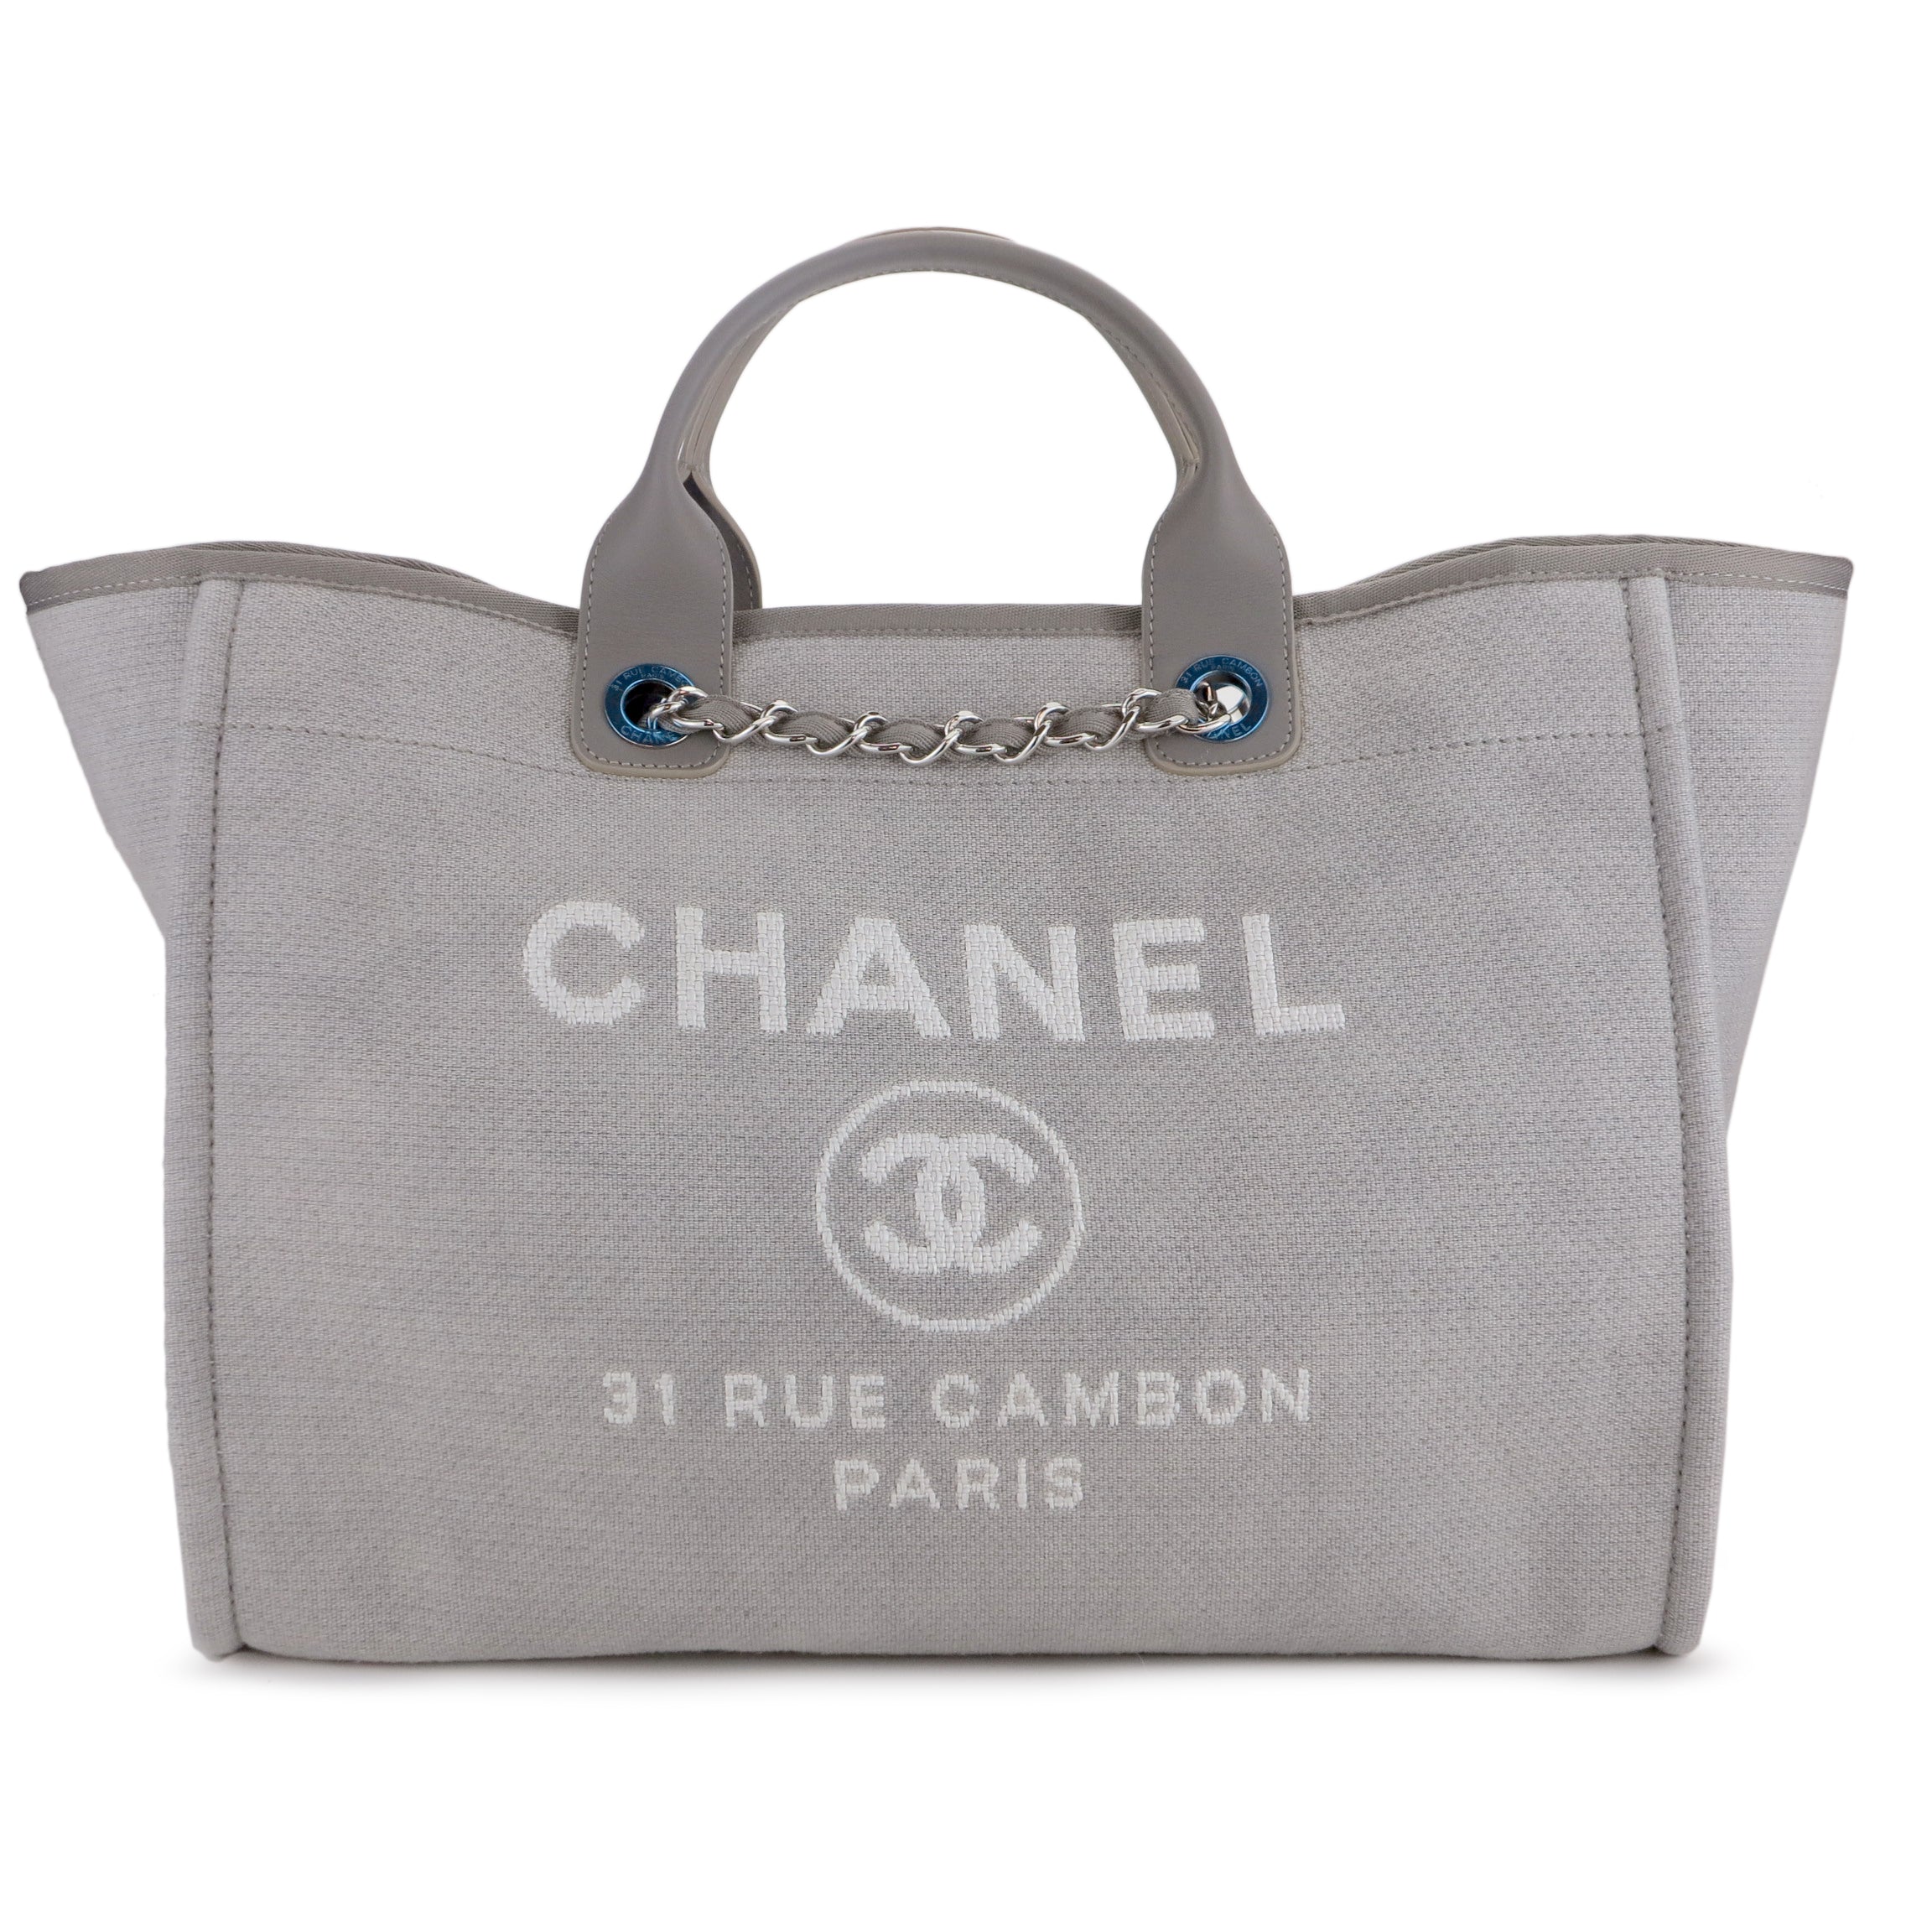 CHANEL Medium Deauville Tote in Grey Canvass